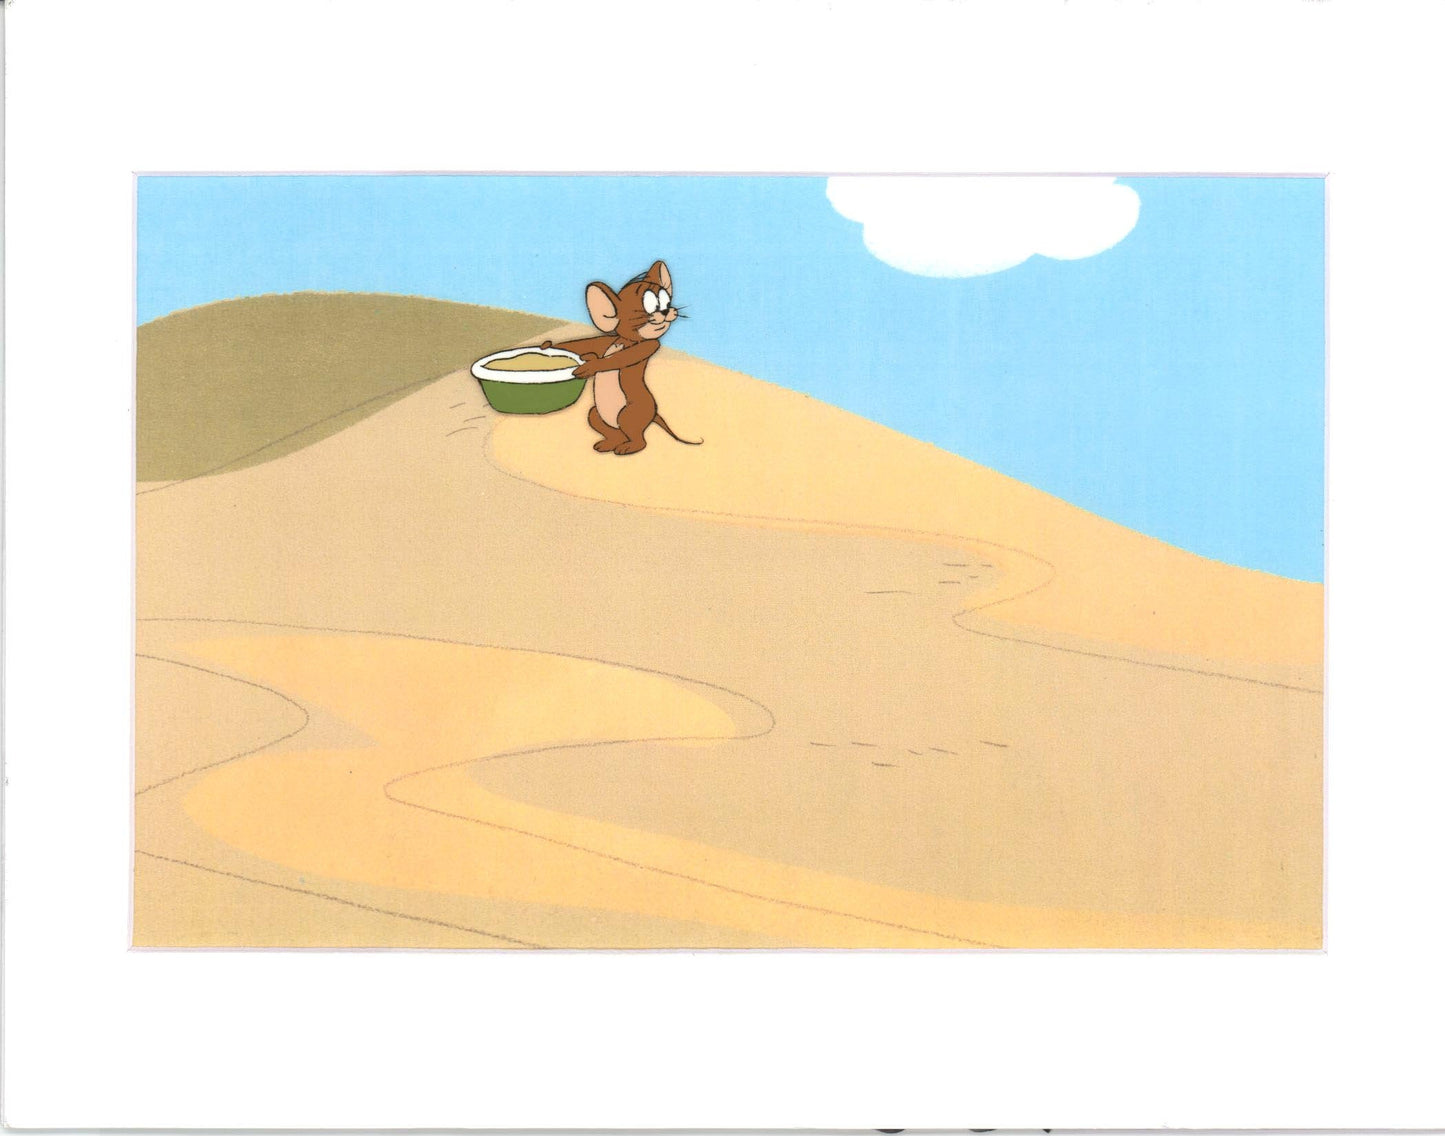 Tom & Jerry Original Production Animation Cel from Filmation 1980-82 b4544